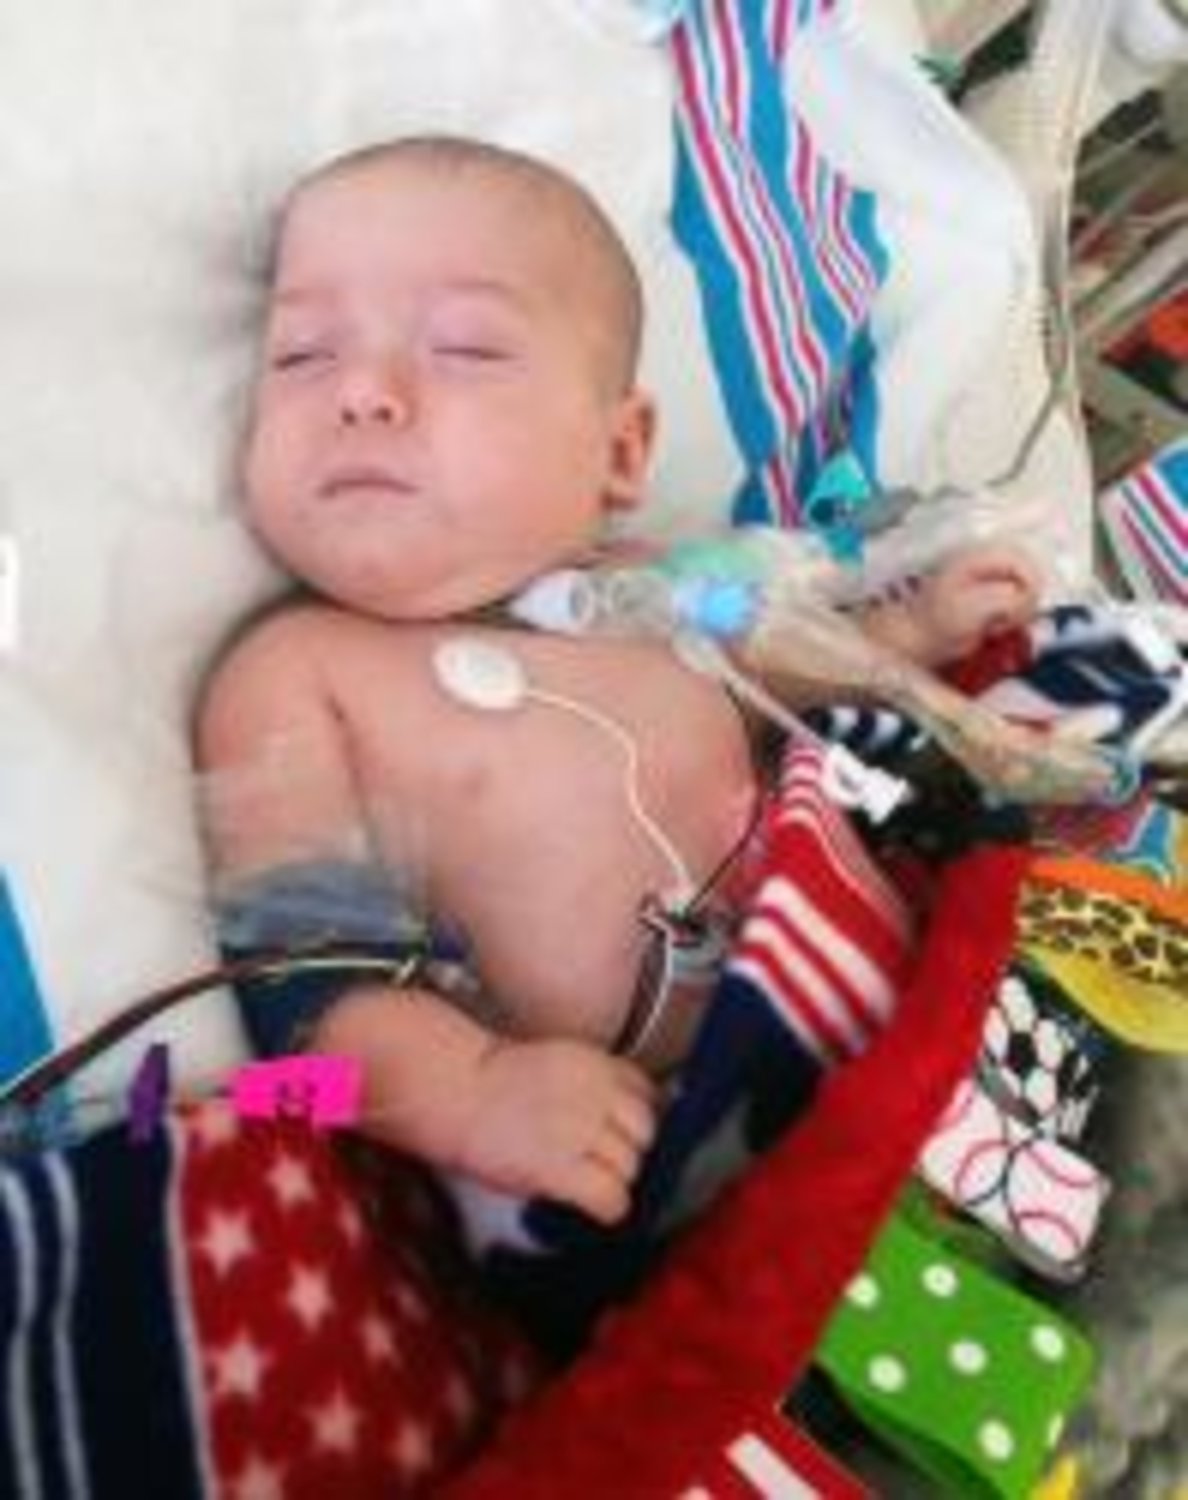 Knox Pugh is seen here at Children's Medical Center in Dallas, where he has lived since he was born prematurely in August 2013.